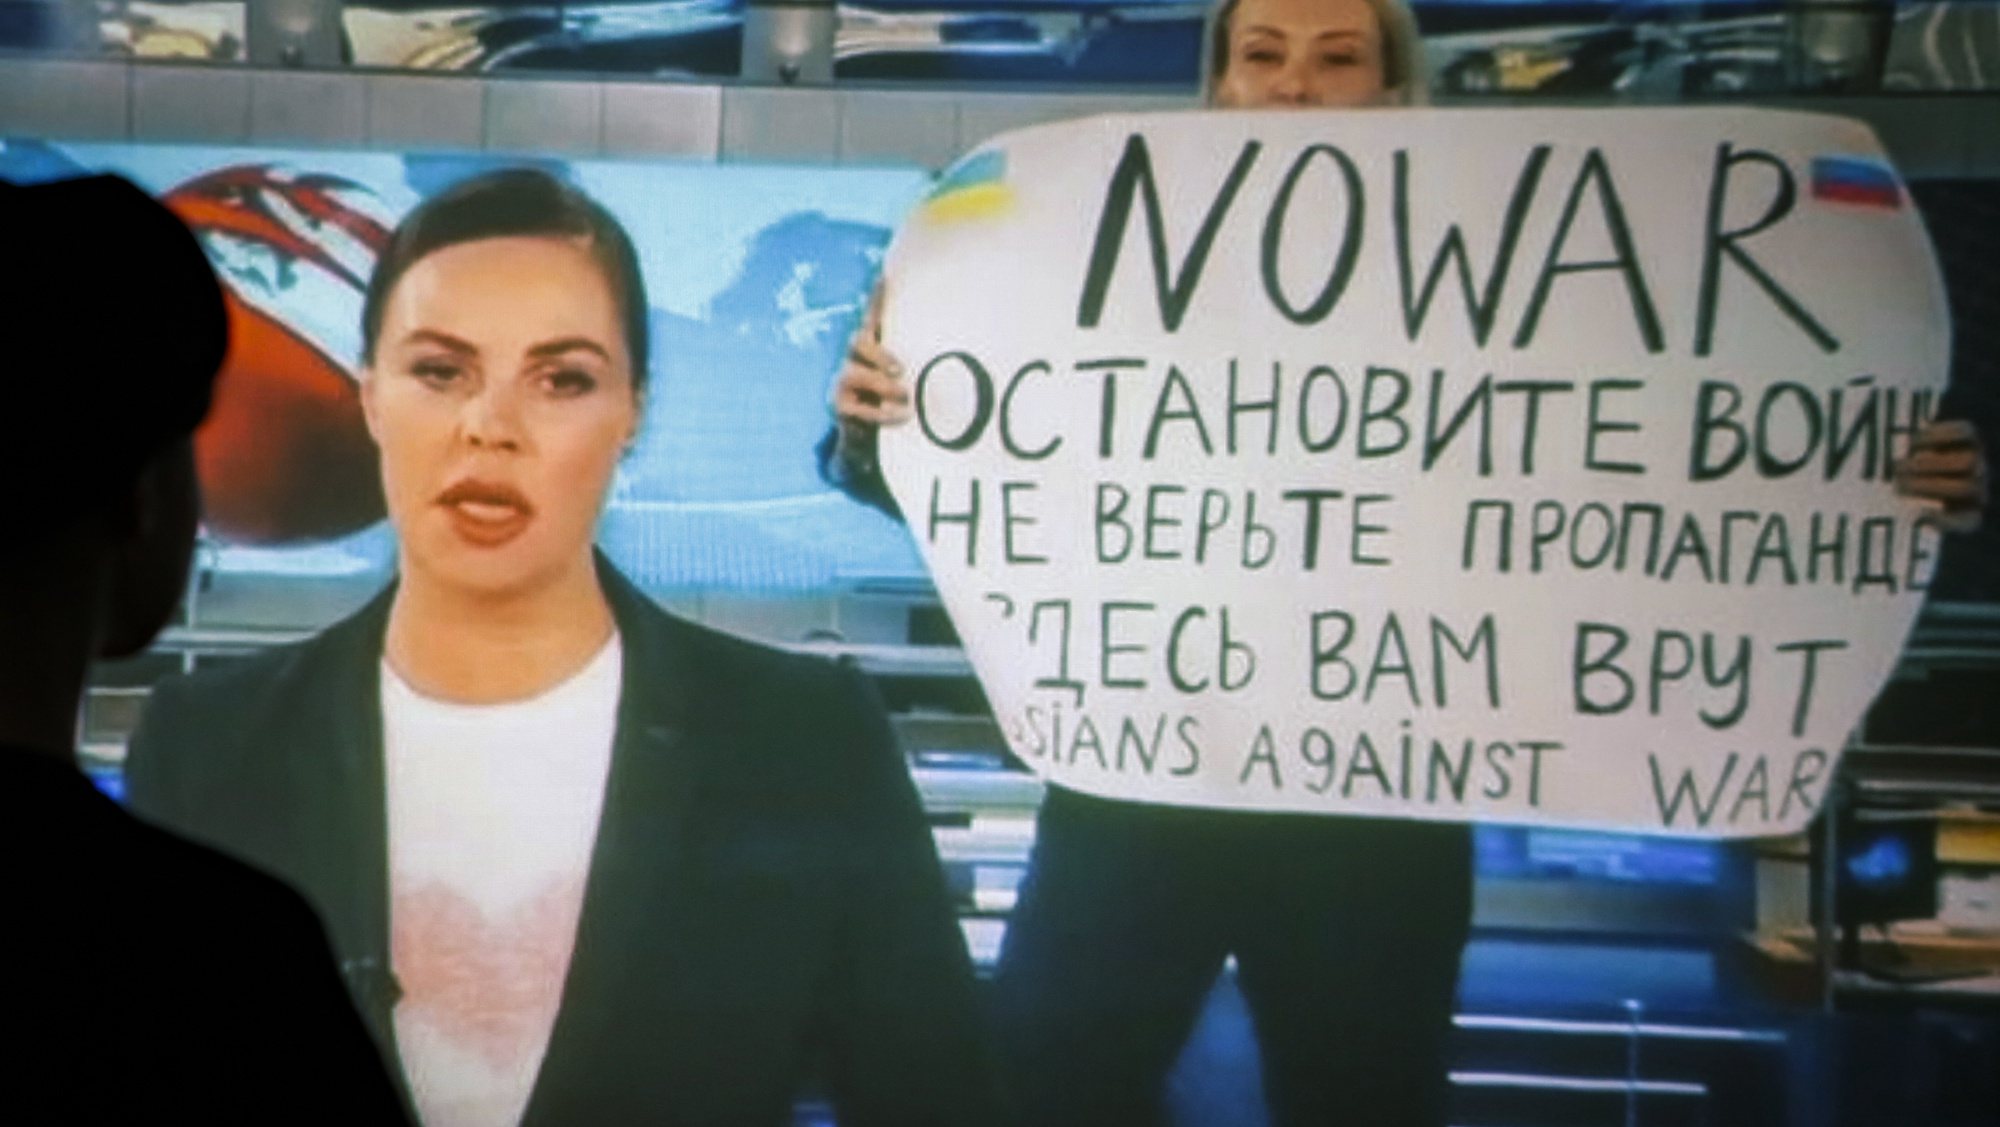 epa09840189 (FILE) - A woman watches a recorded feed of the Russian Channel One&#039;s evening news broadcast TV show in which an employee enters Ostankino on-air TV studio with a poster reading &#039;&#039;No War. Stop the war. Don&#039;t believe the propaganda. You are being lied to here&quot; in Moscow, Russia, 15 March 2022 (reissued 21 March 2022). The on-air protest was staged on 14 March by Marina Ovsyannikova, who worked as an editor. She was taken to the Ostankino police department. More than three million Ukrainians became refugees, around 700 civilians were killed and over 1.000 more inured in the month-long conflict, the United Nations said.  EPA/DSK  ATTENTION: This Image is part of a PHOTO SET